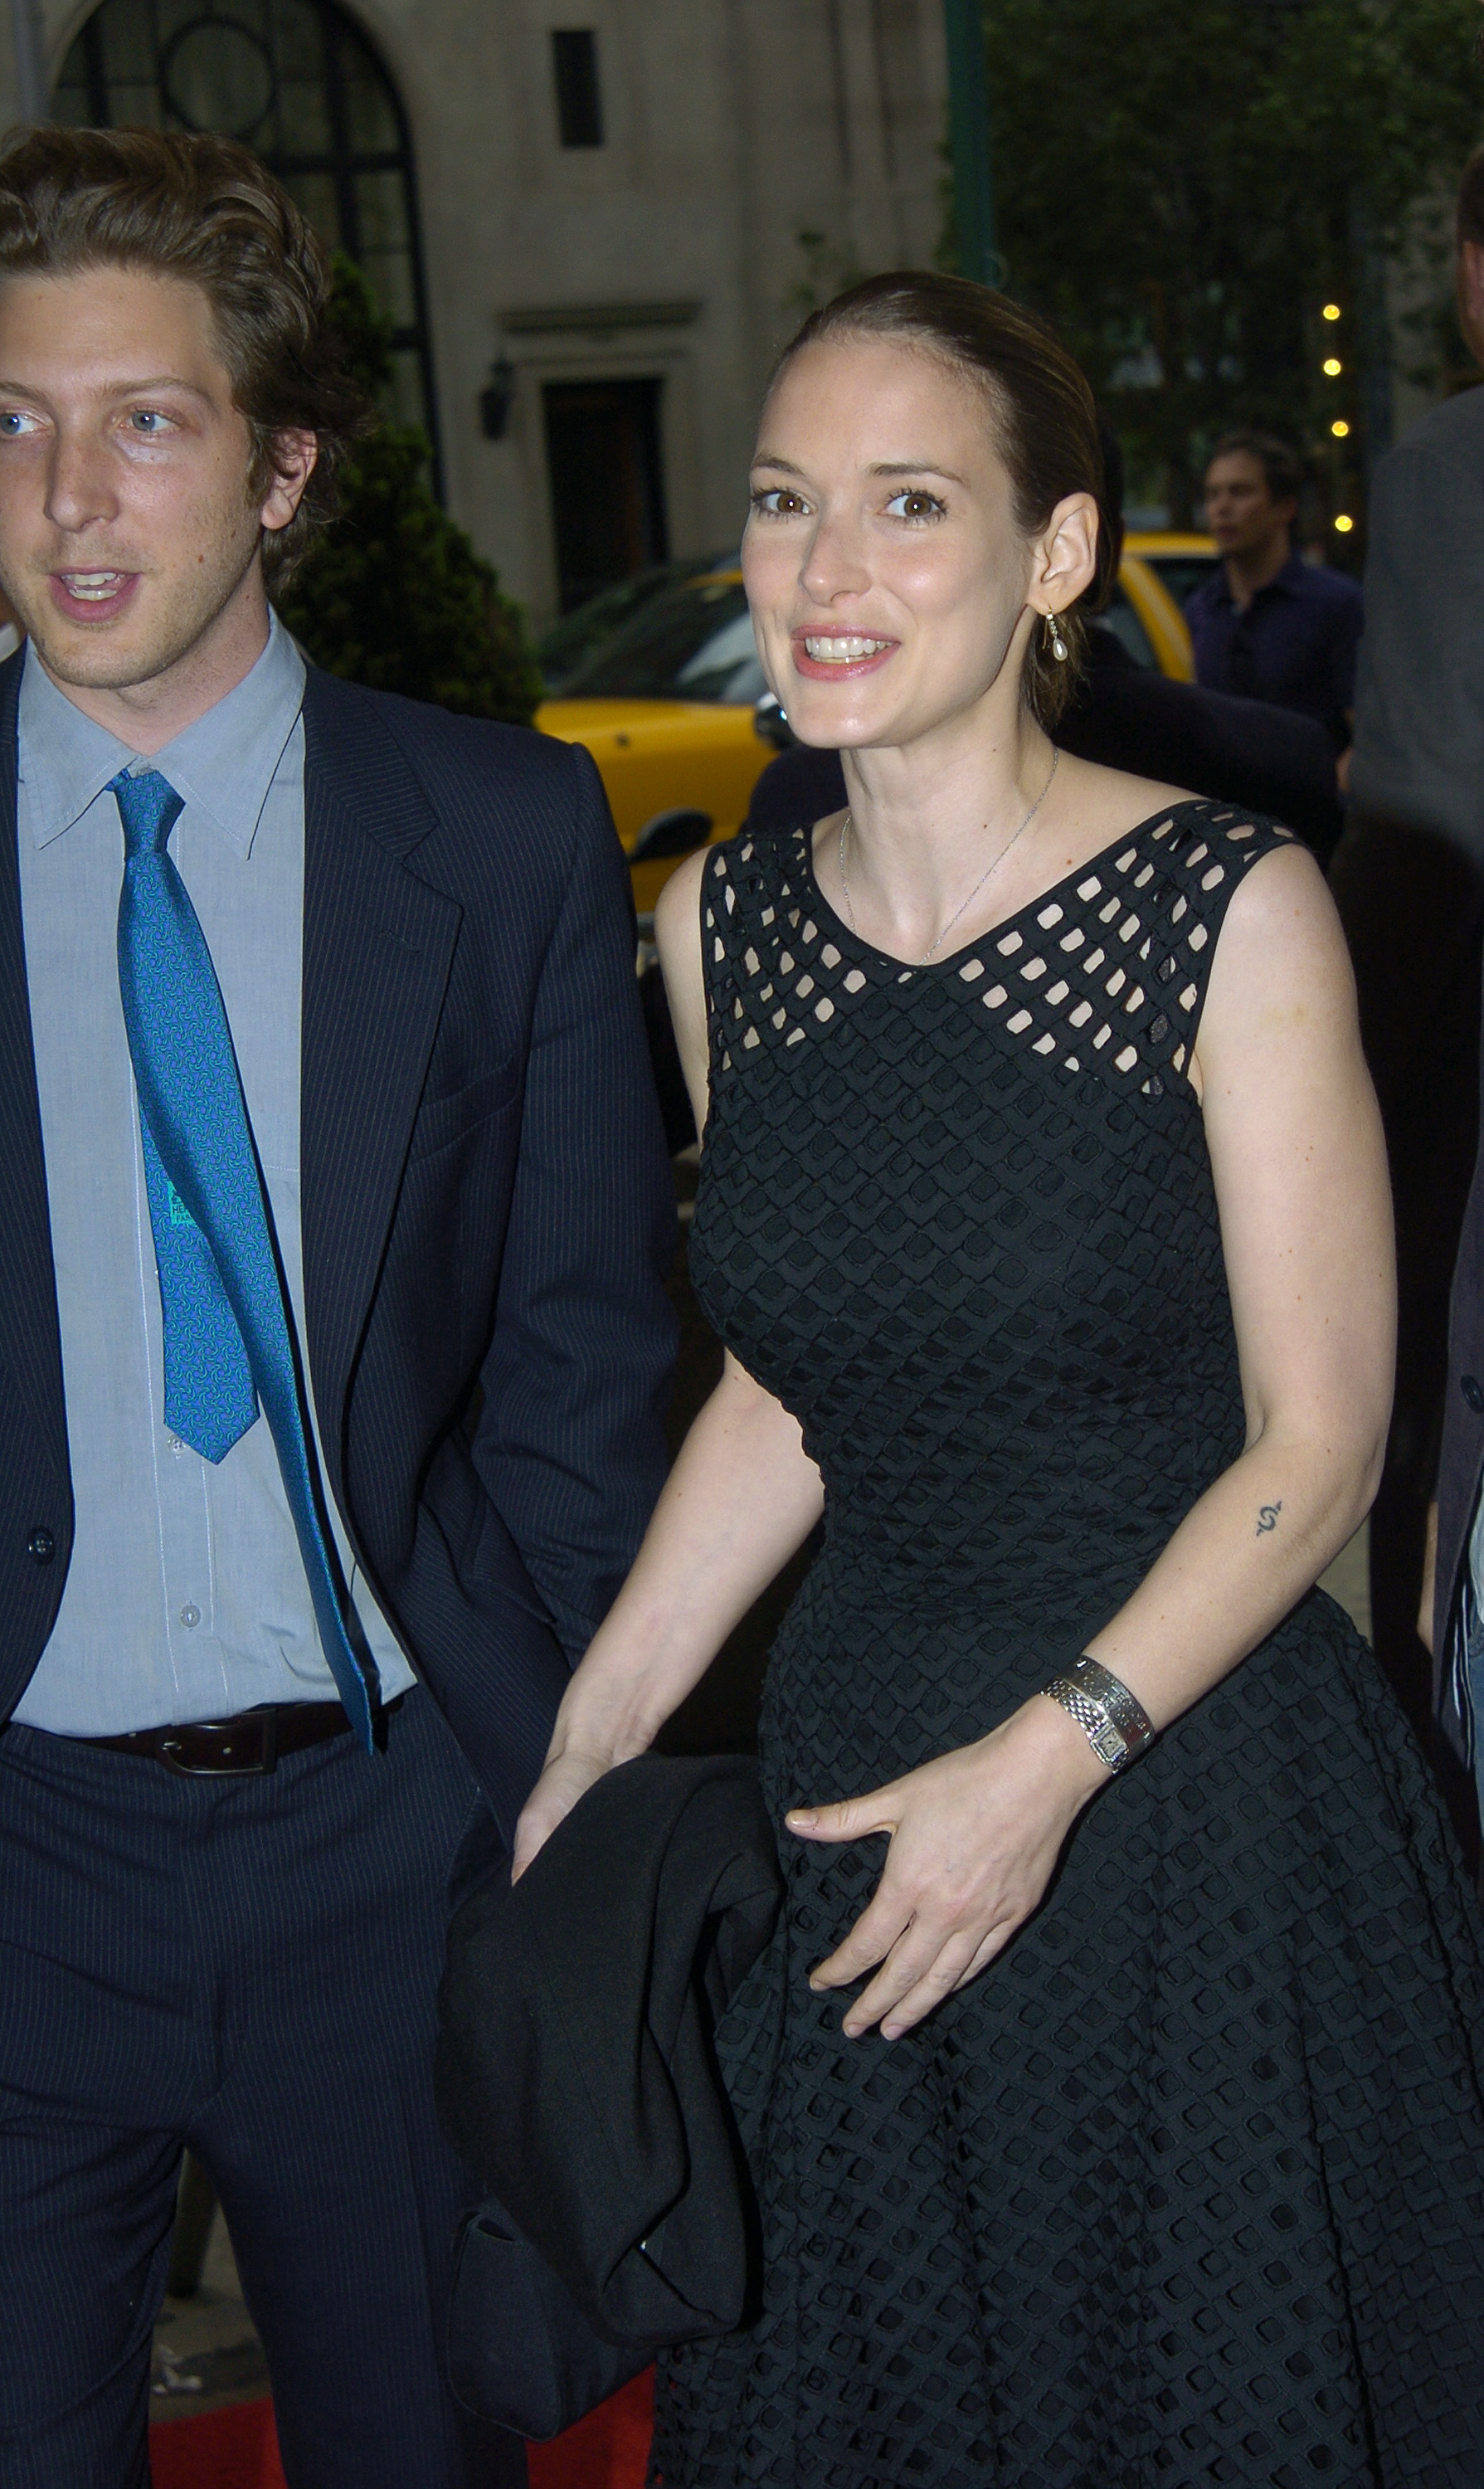 Winona Ryder and an unidentified man at the "Murderball" premiere in New York City, 2005 | Source: Getty Images